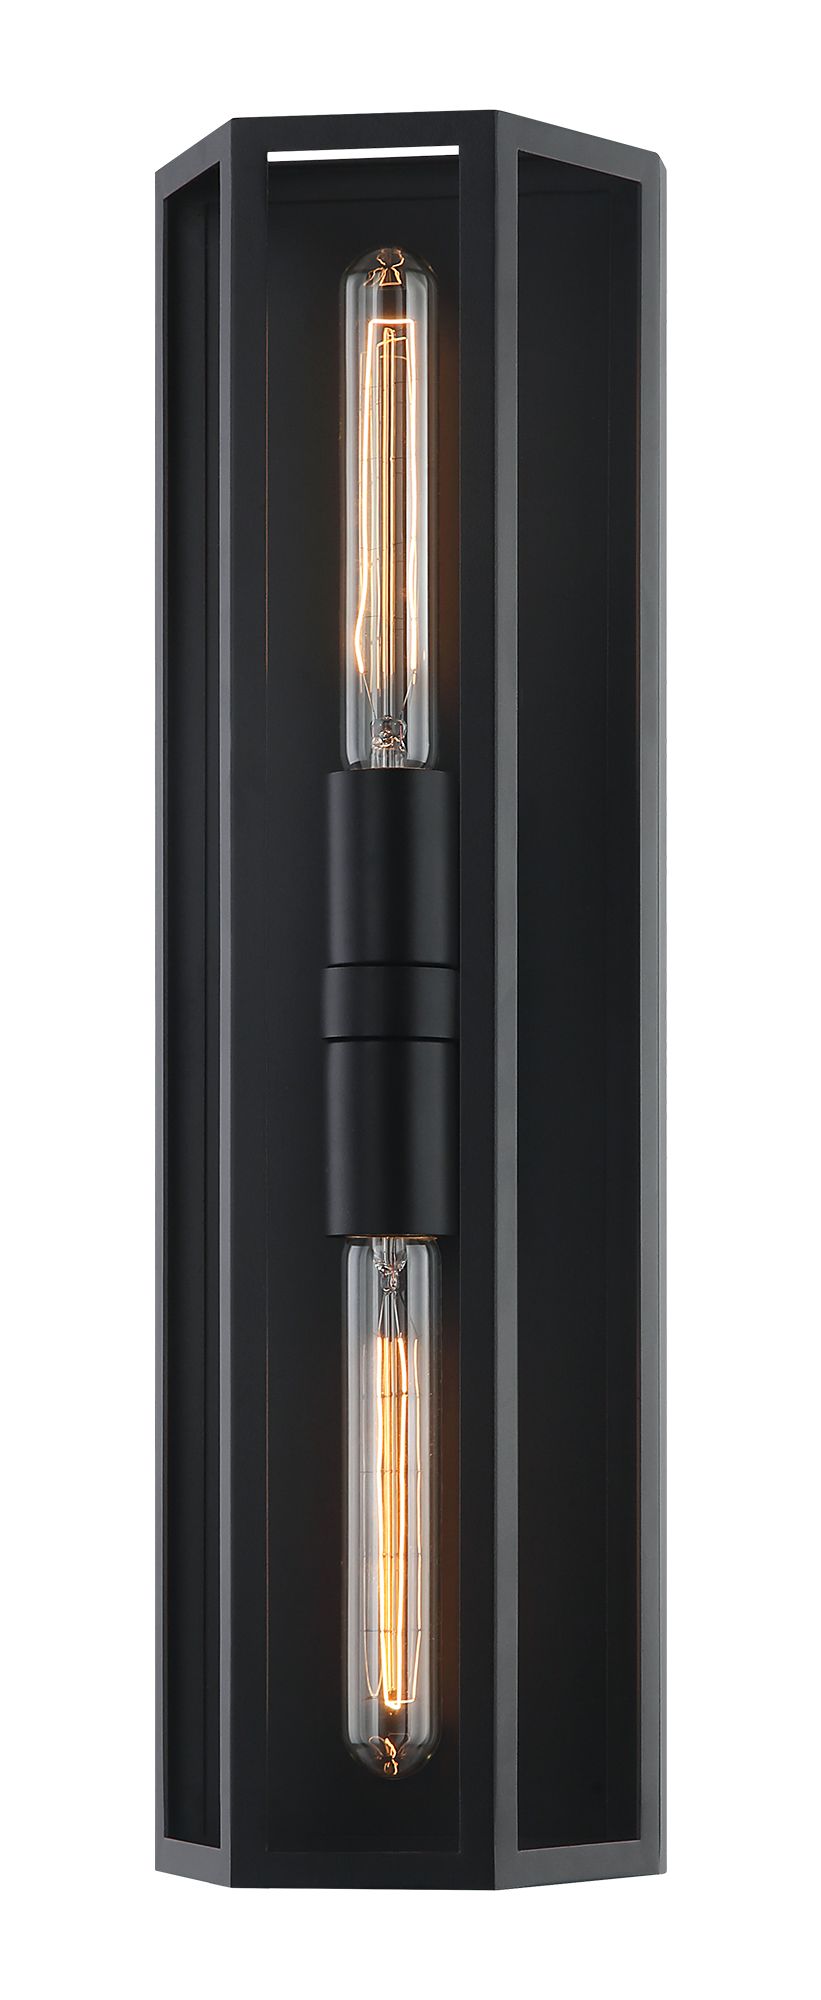 CREED Wall sconce Black - W64512MB | TEO